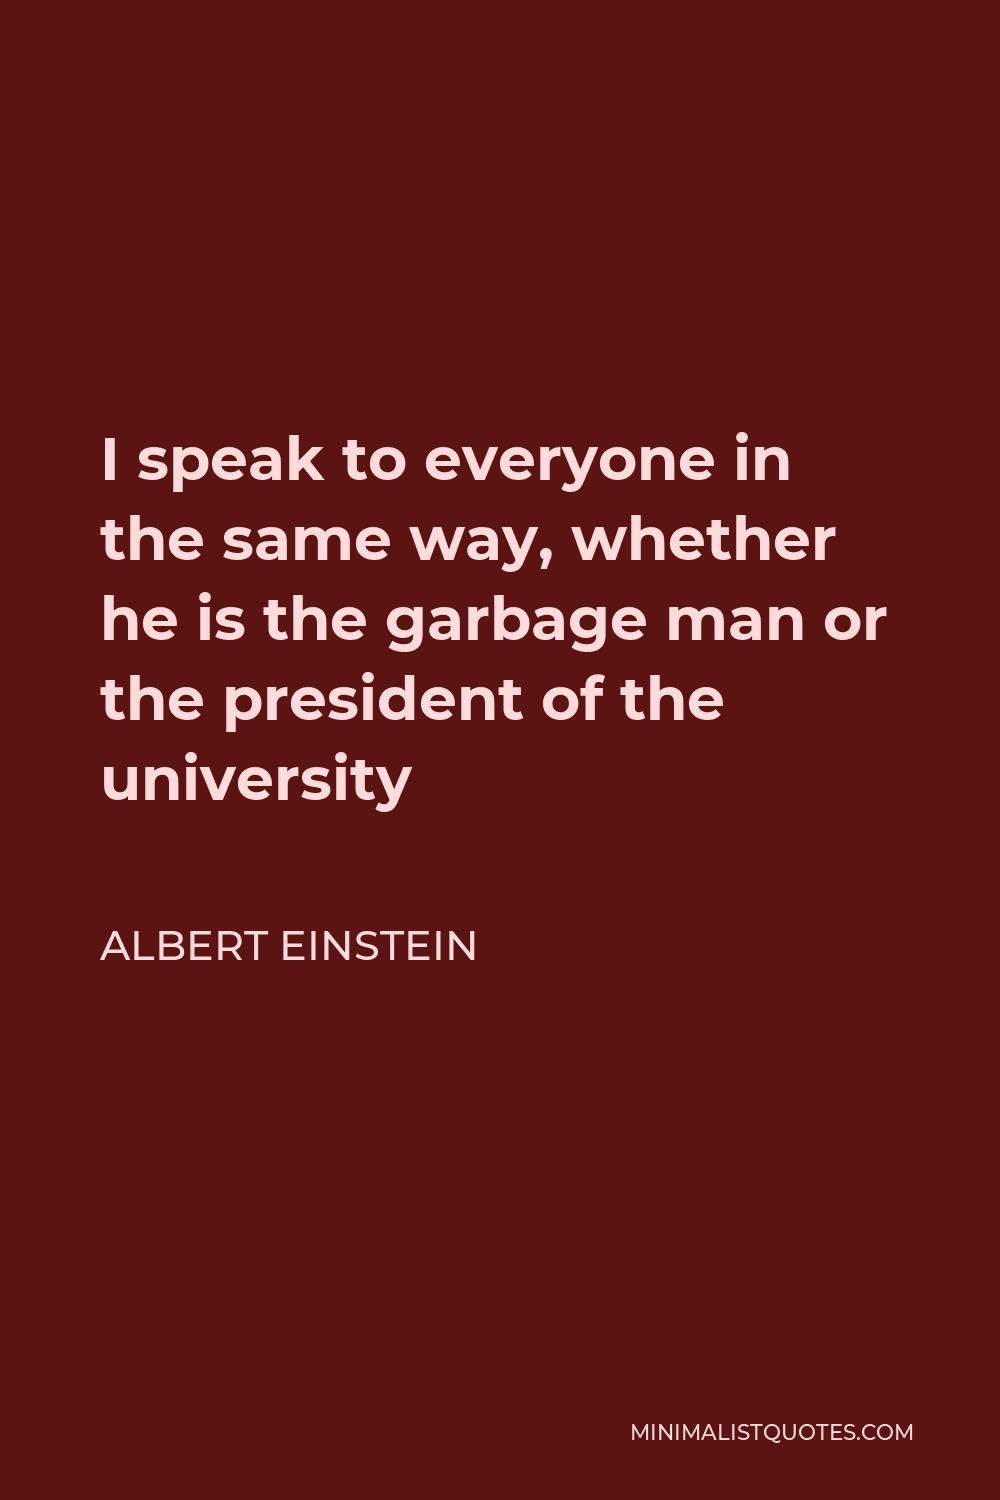 Albert Einstein Quote - I speak to everyone in the same way, whether he is the garbage man or the president of the university